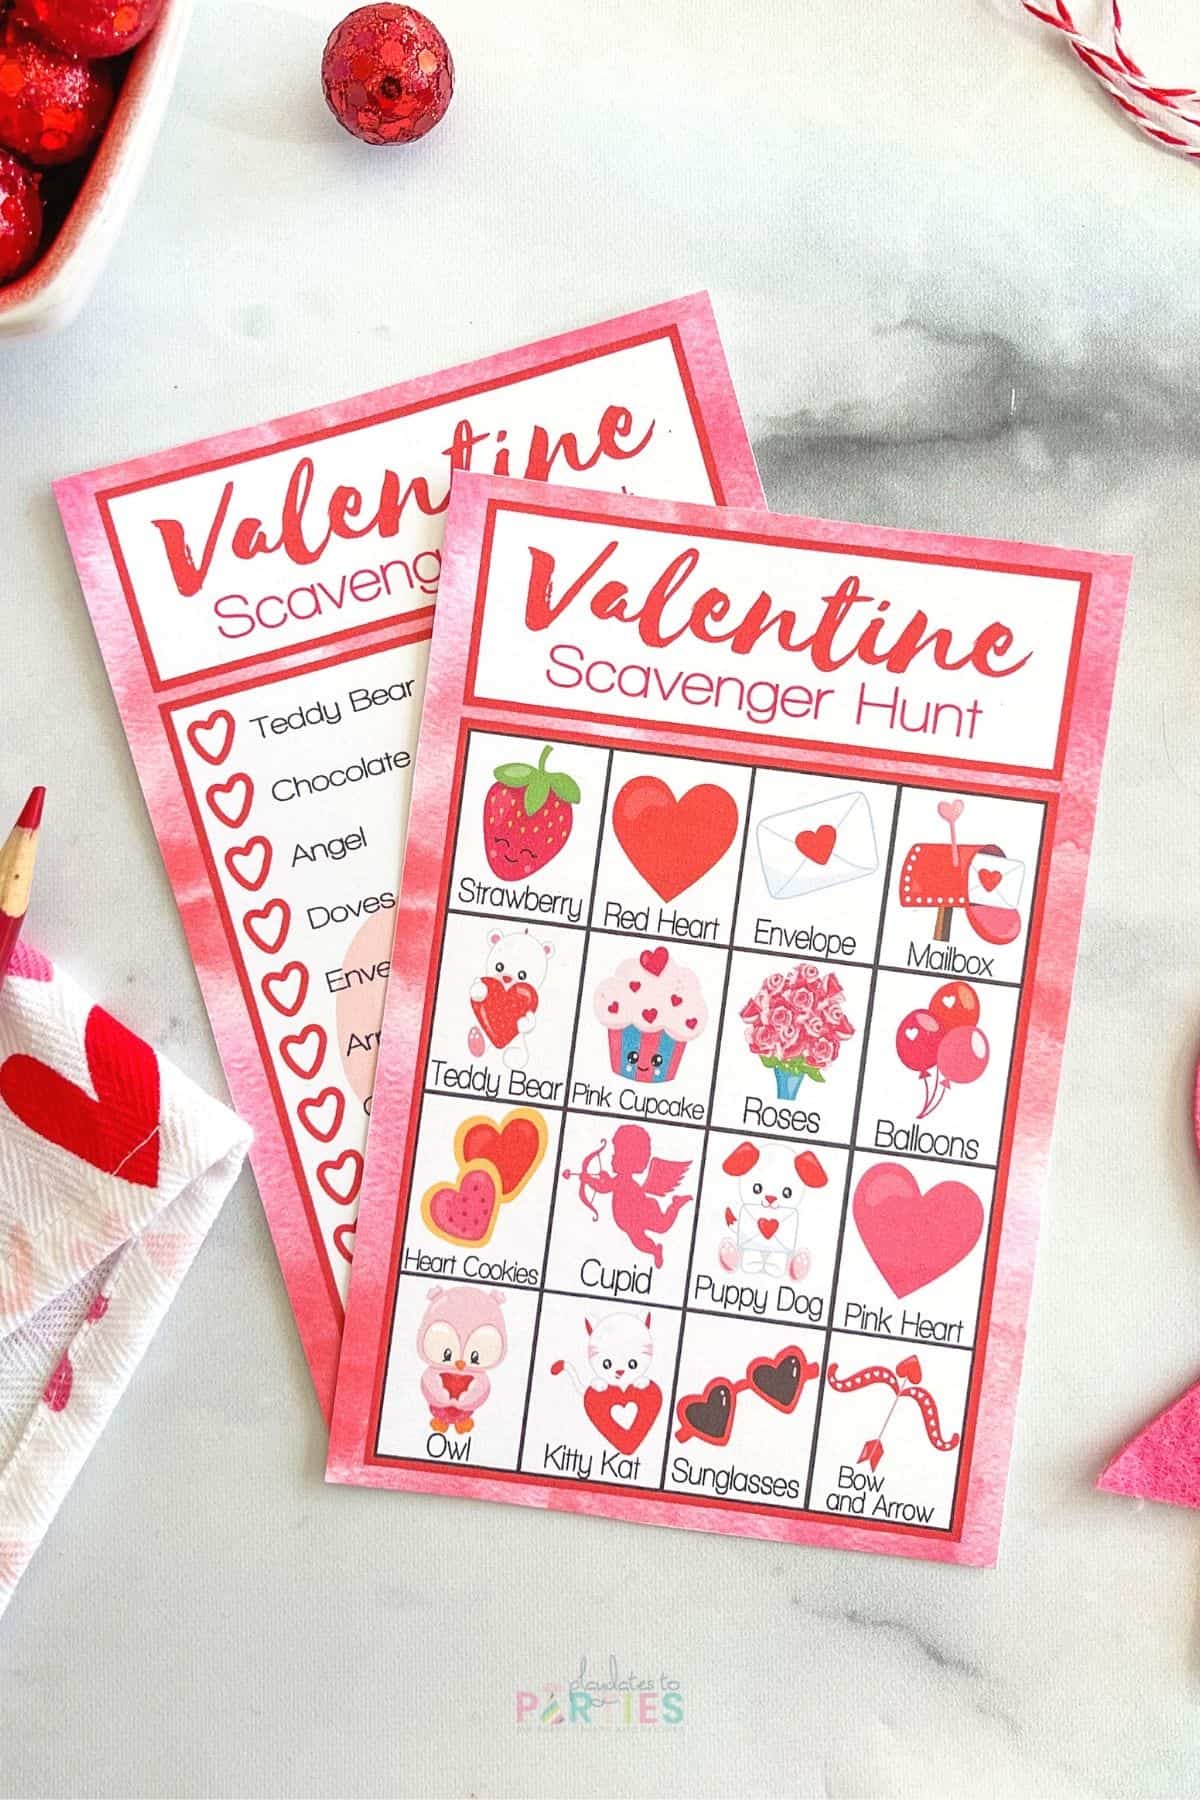 Two printable Valentine's Day games on a marble surface.